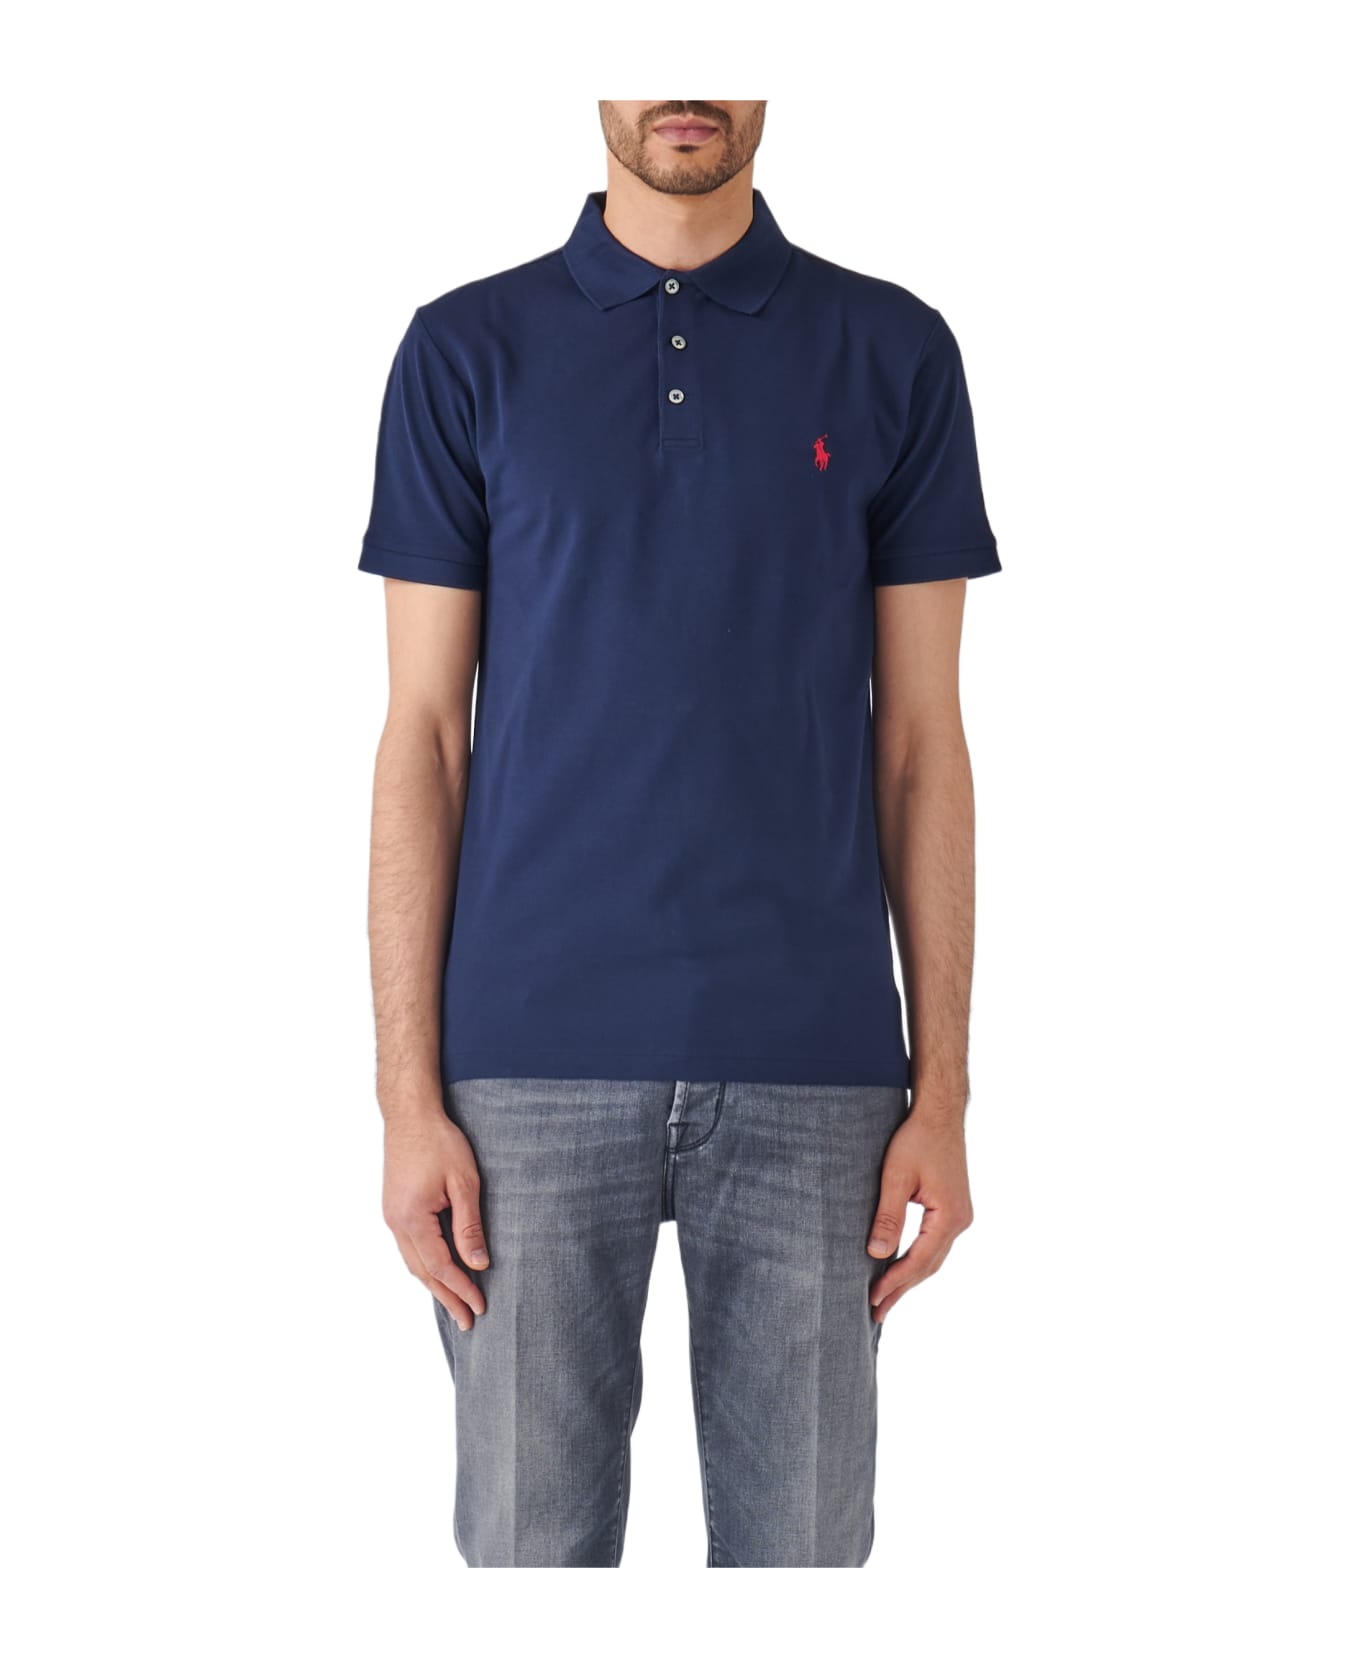 Polo Ralph Lauren Dark Blue Slim Fit Polo Shirt With Contrasting Pony - Blue